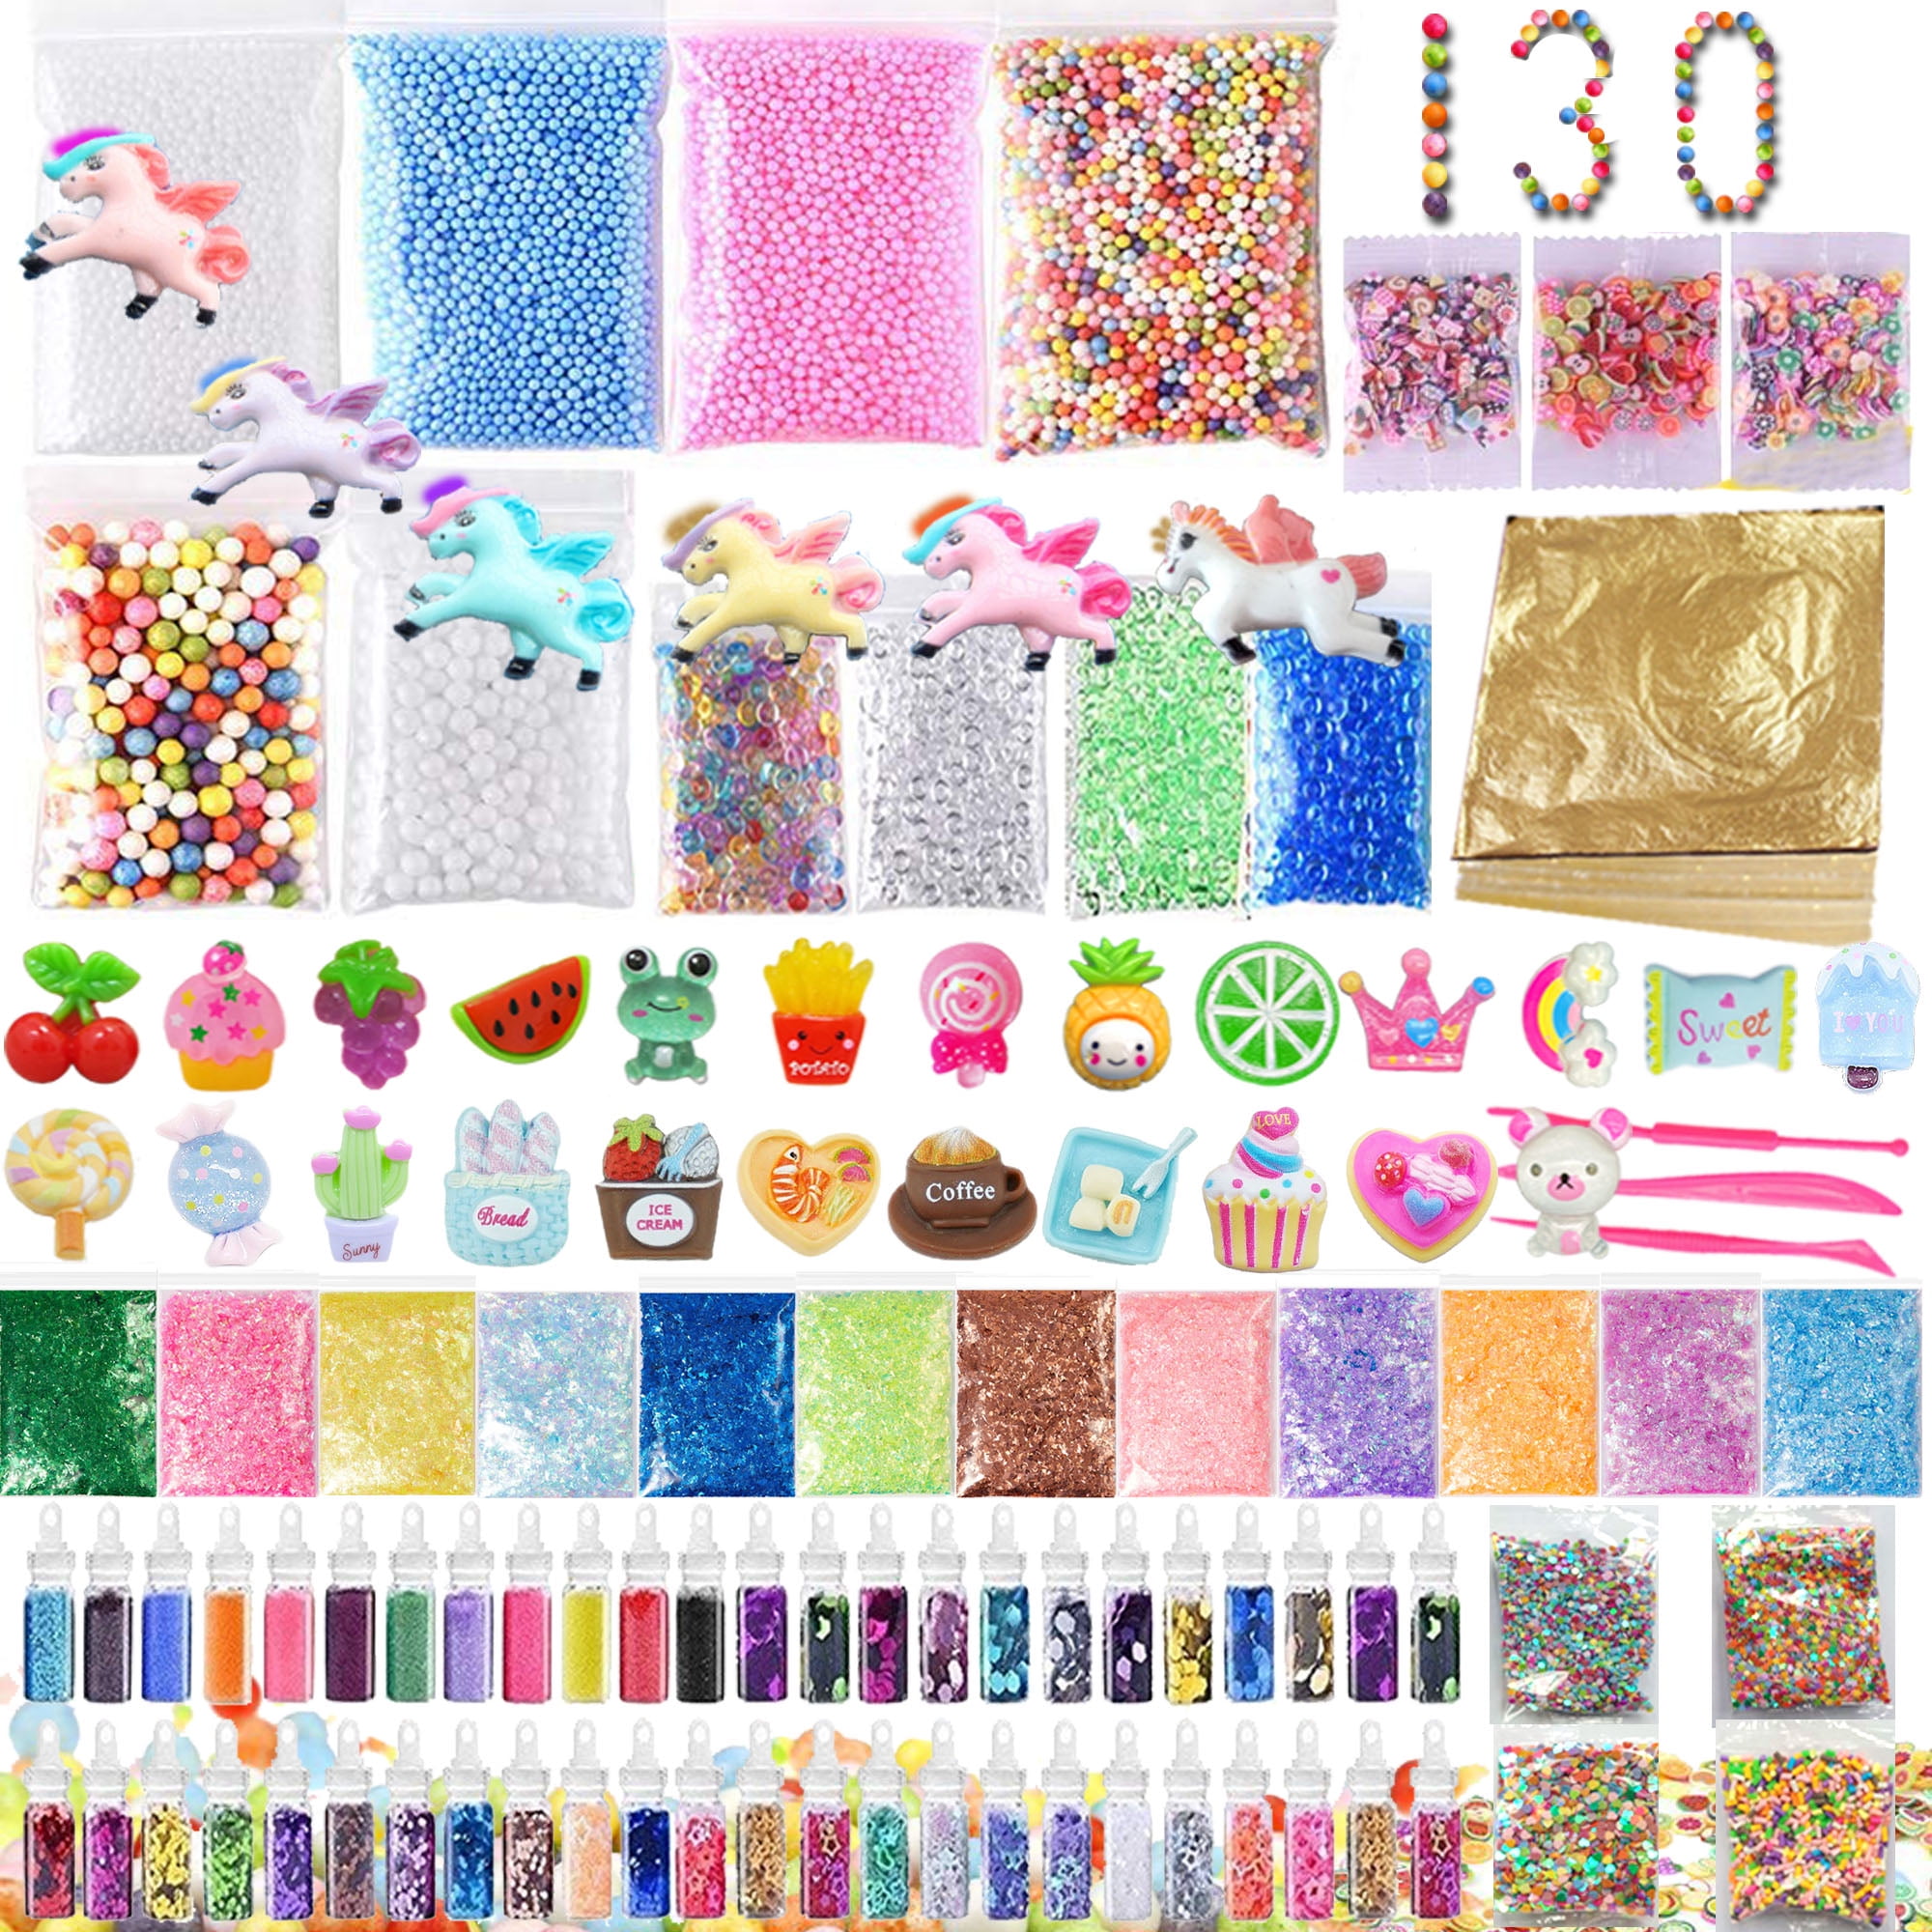 Slime Supplies Kit, 205 Pack Add Ins Slime Kit for Kids Girls Slime Making,  Including Foam Balls, Glitter, Fishbowl Beads, Charms, Clear Containers by